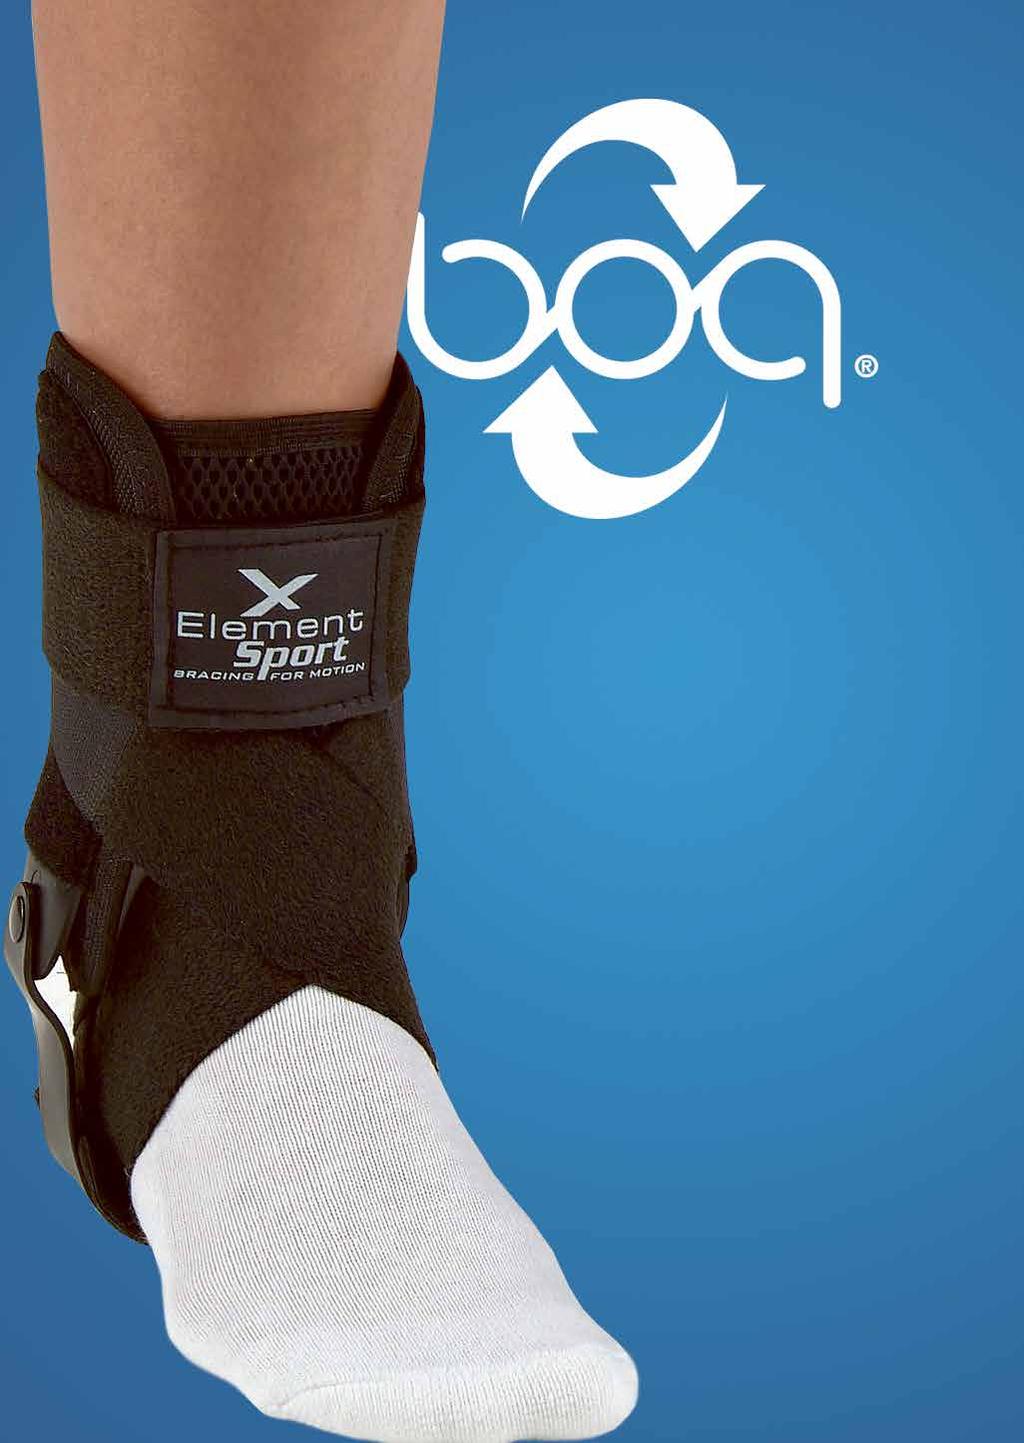 4 Help for Foot & Ankle Element Sport Ankle Brace powered by The Boa Closure System Element Sport Ankle is a hybrid between a hard shell orthosis and a soft brace.